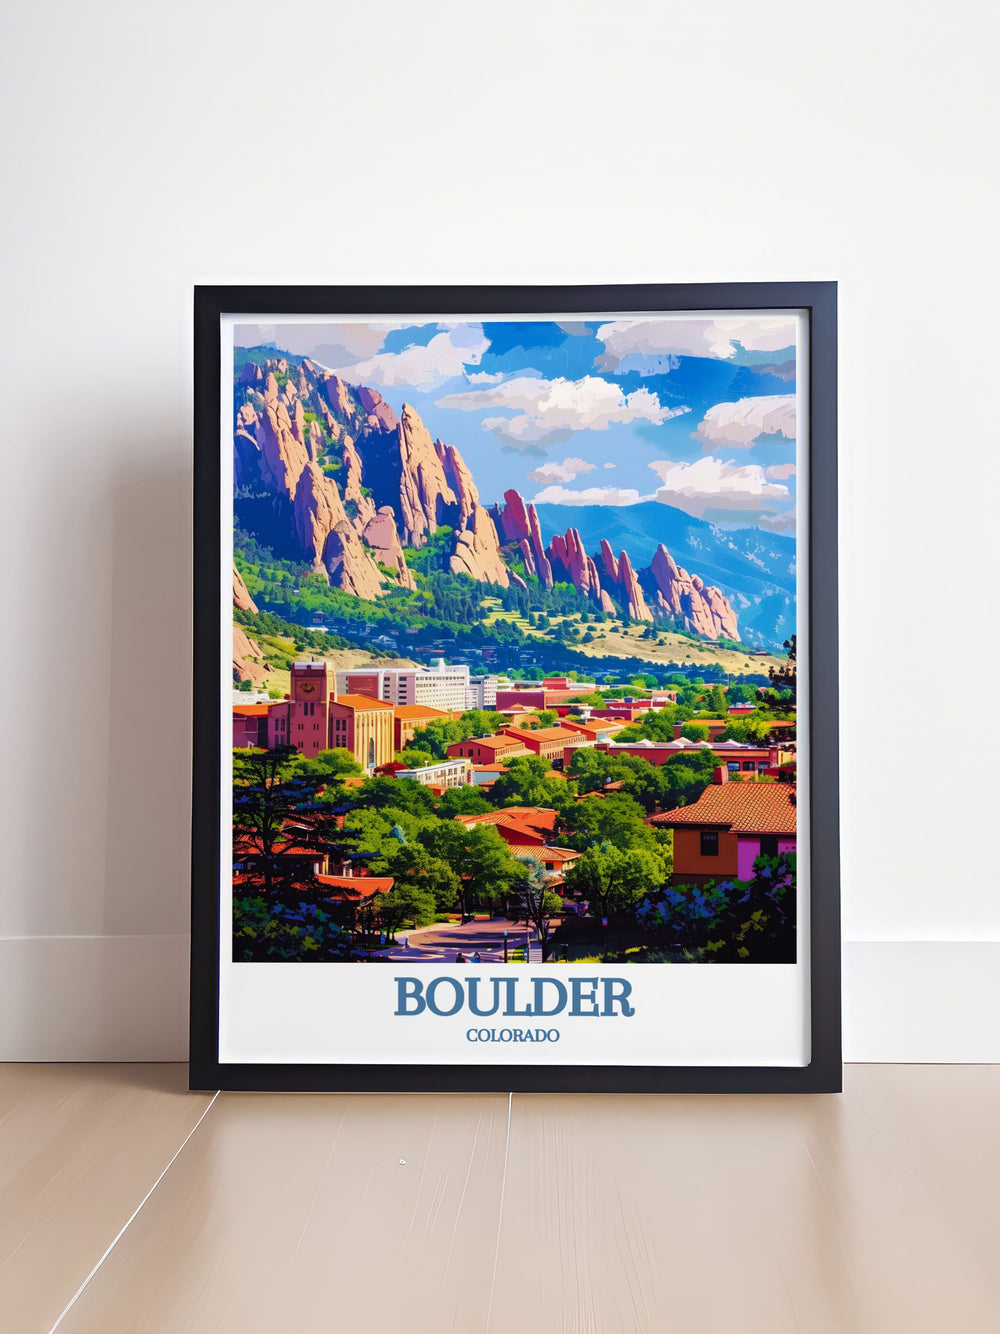 Canvas art print showcasing the majestic Flatirons of Boulder, Colorado, with vibrant colors and intricate details that bring the dramatic rock formations to life, ideal for adding a scenic and inspiring view to your living space.